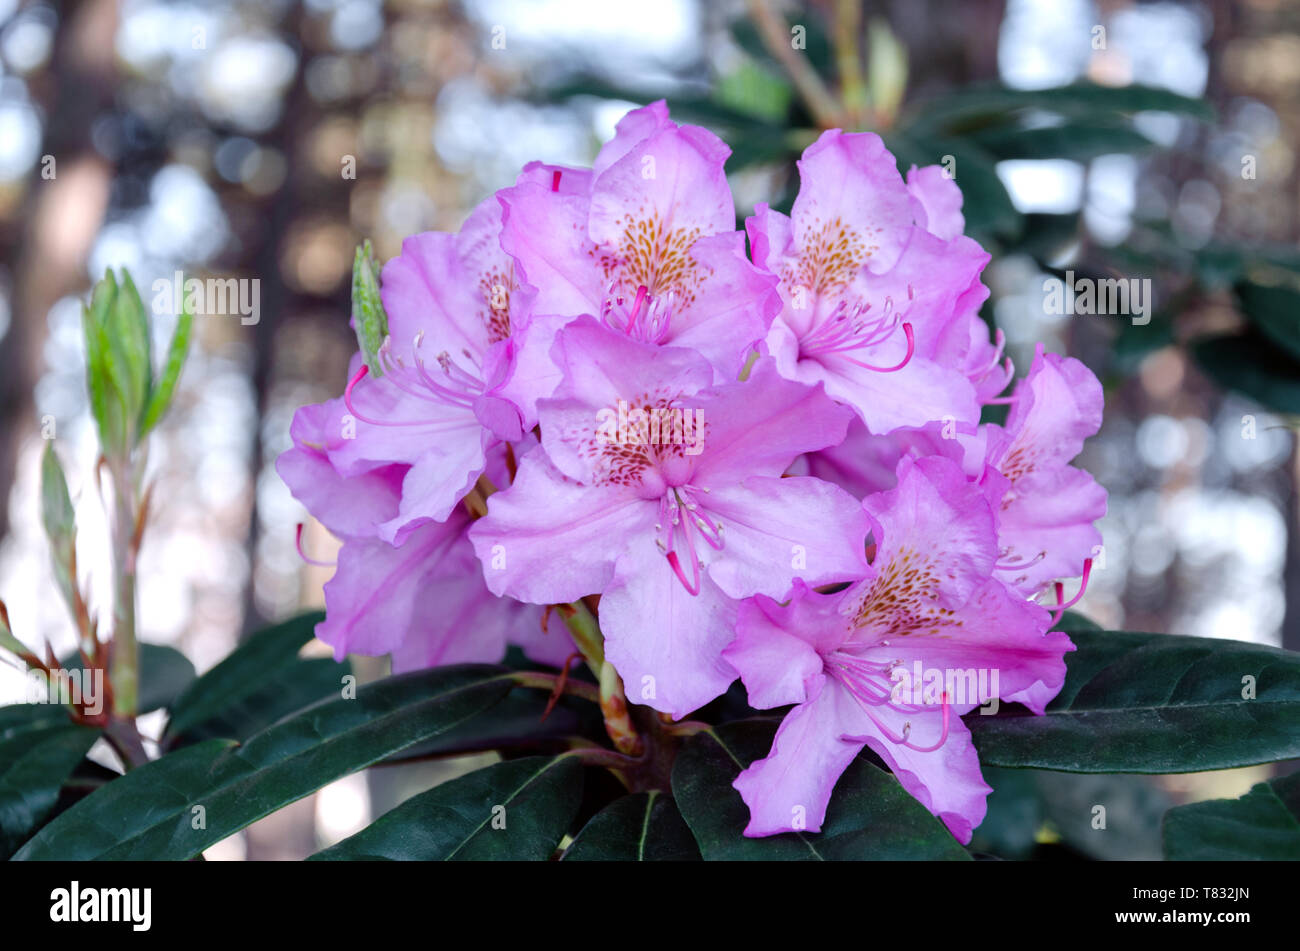 rhododendron inflorescence on a bush with green leaves happy afternoon in the garden, close-up Stock Photo